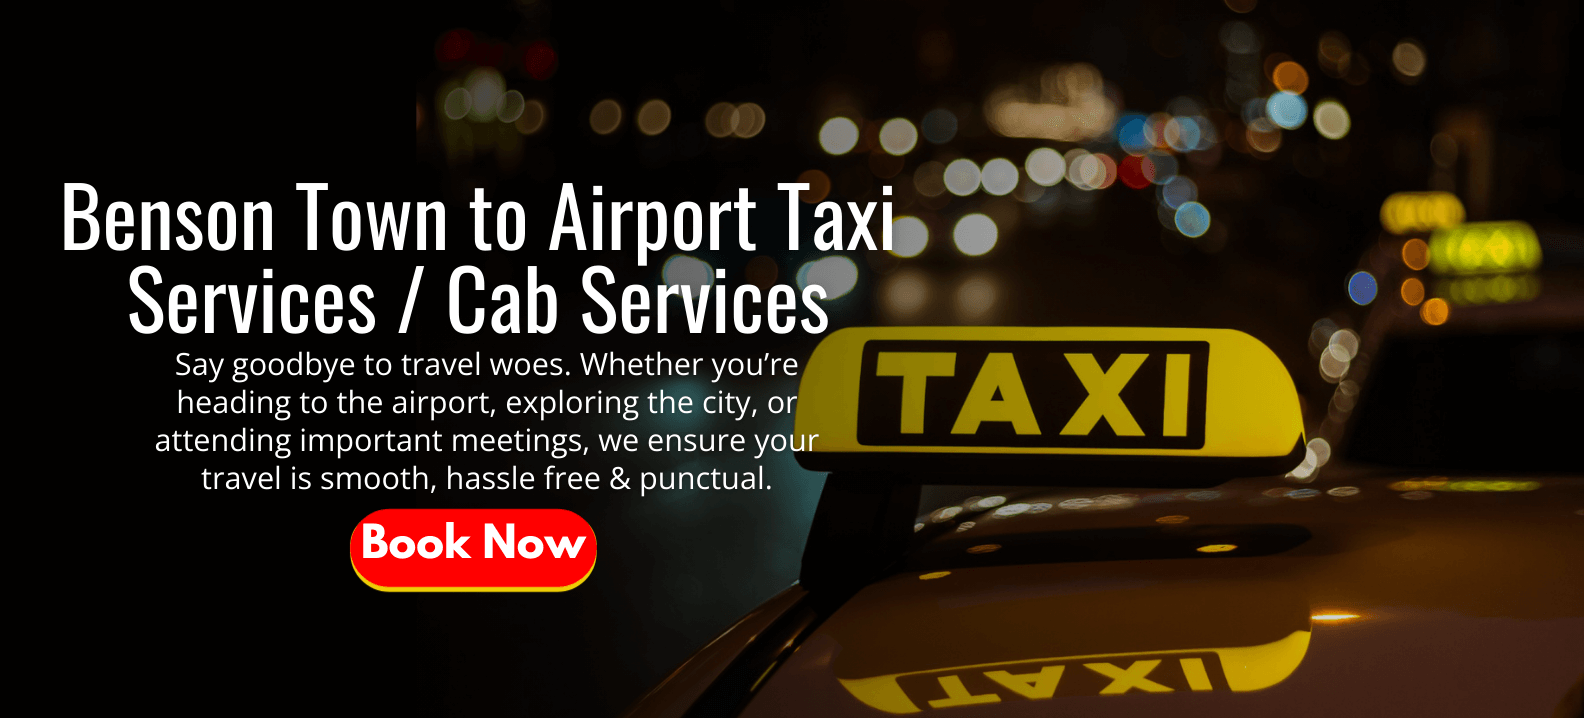 Benson Town to Airport Taxi Services _ Cab Services